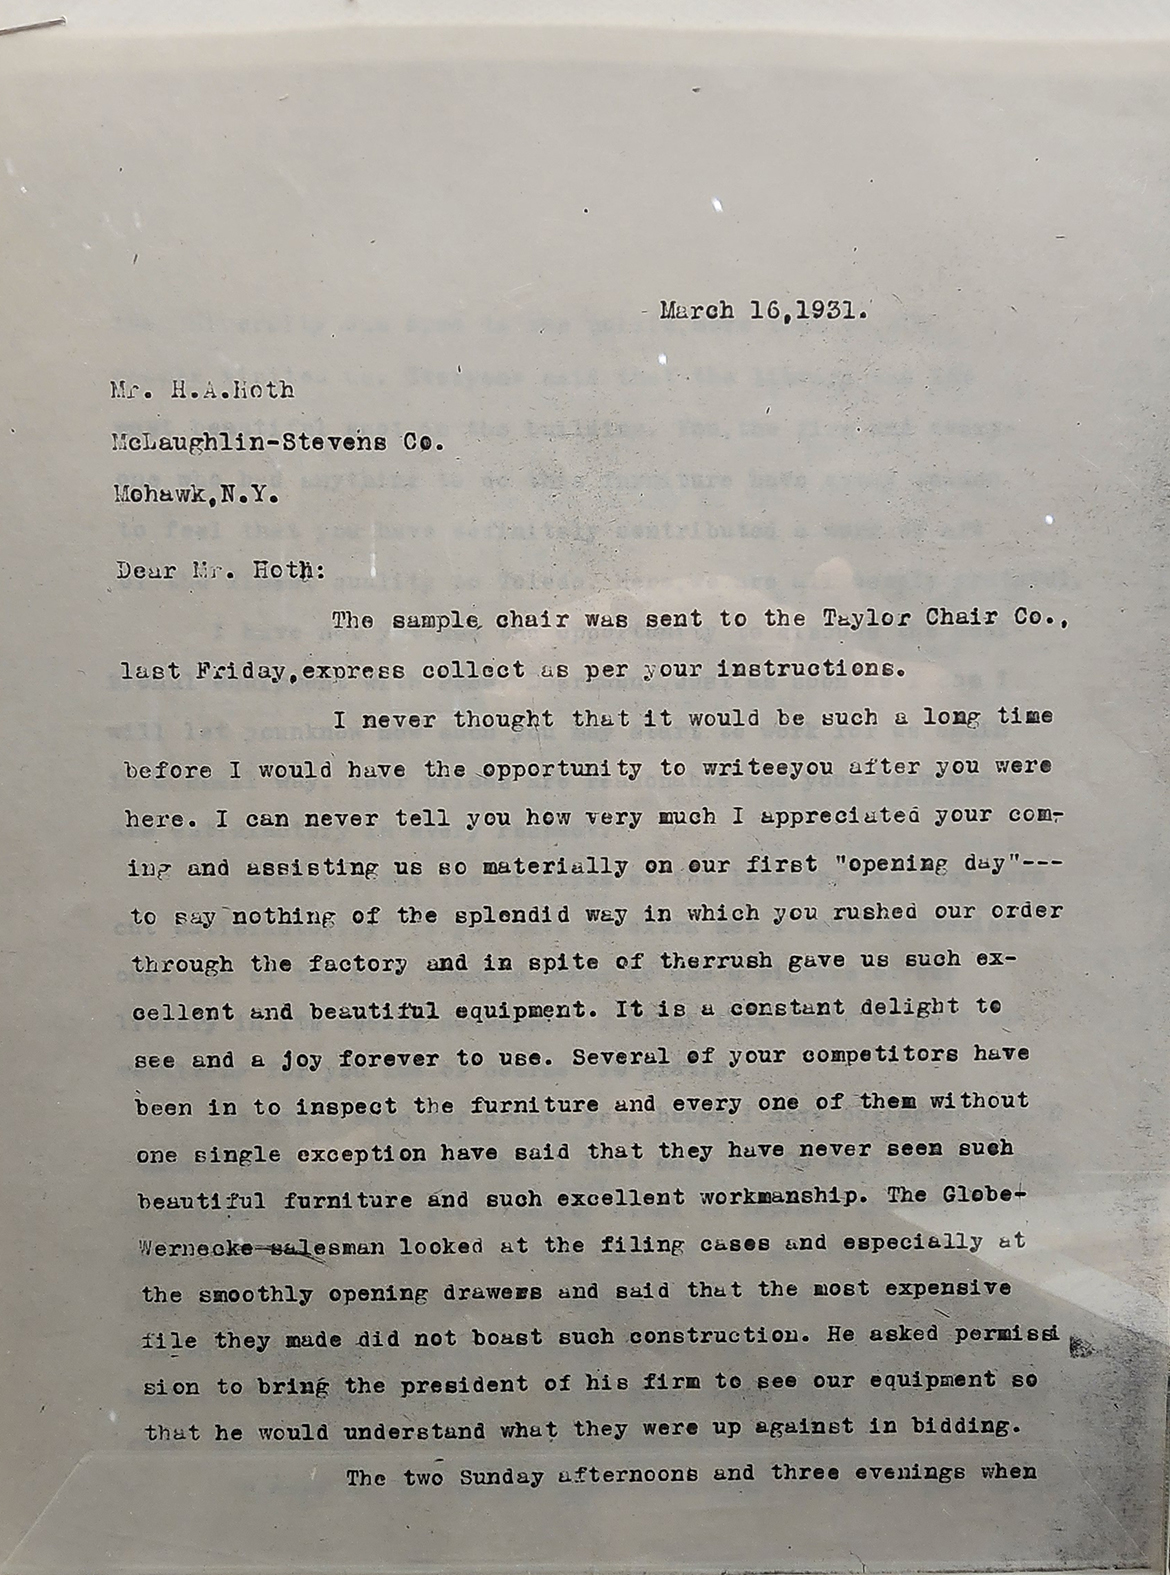 Letter to McLaughlin-Stevens Co. regarding library furniture, March 16, 1931